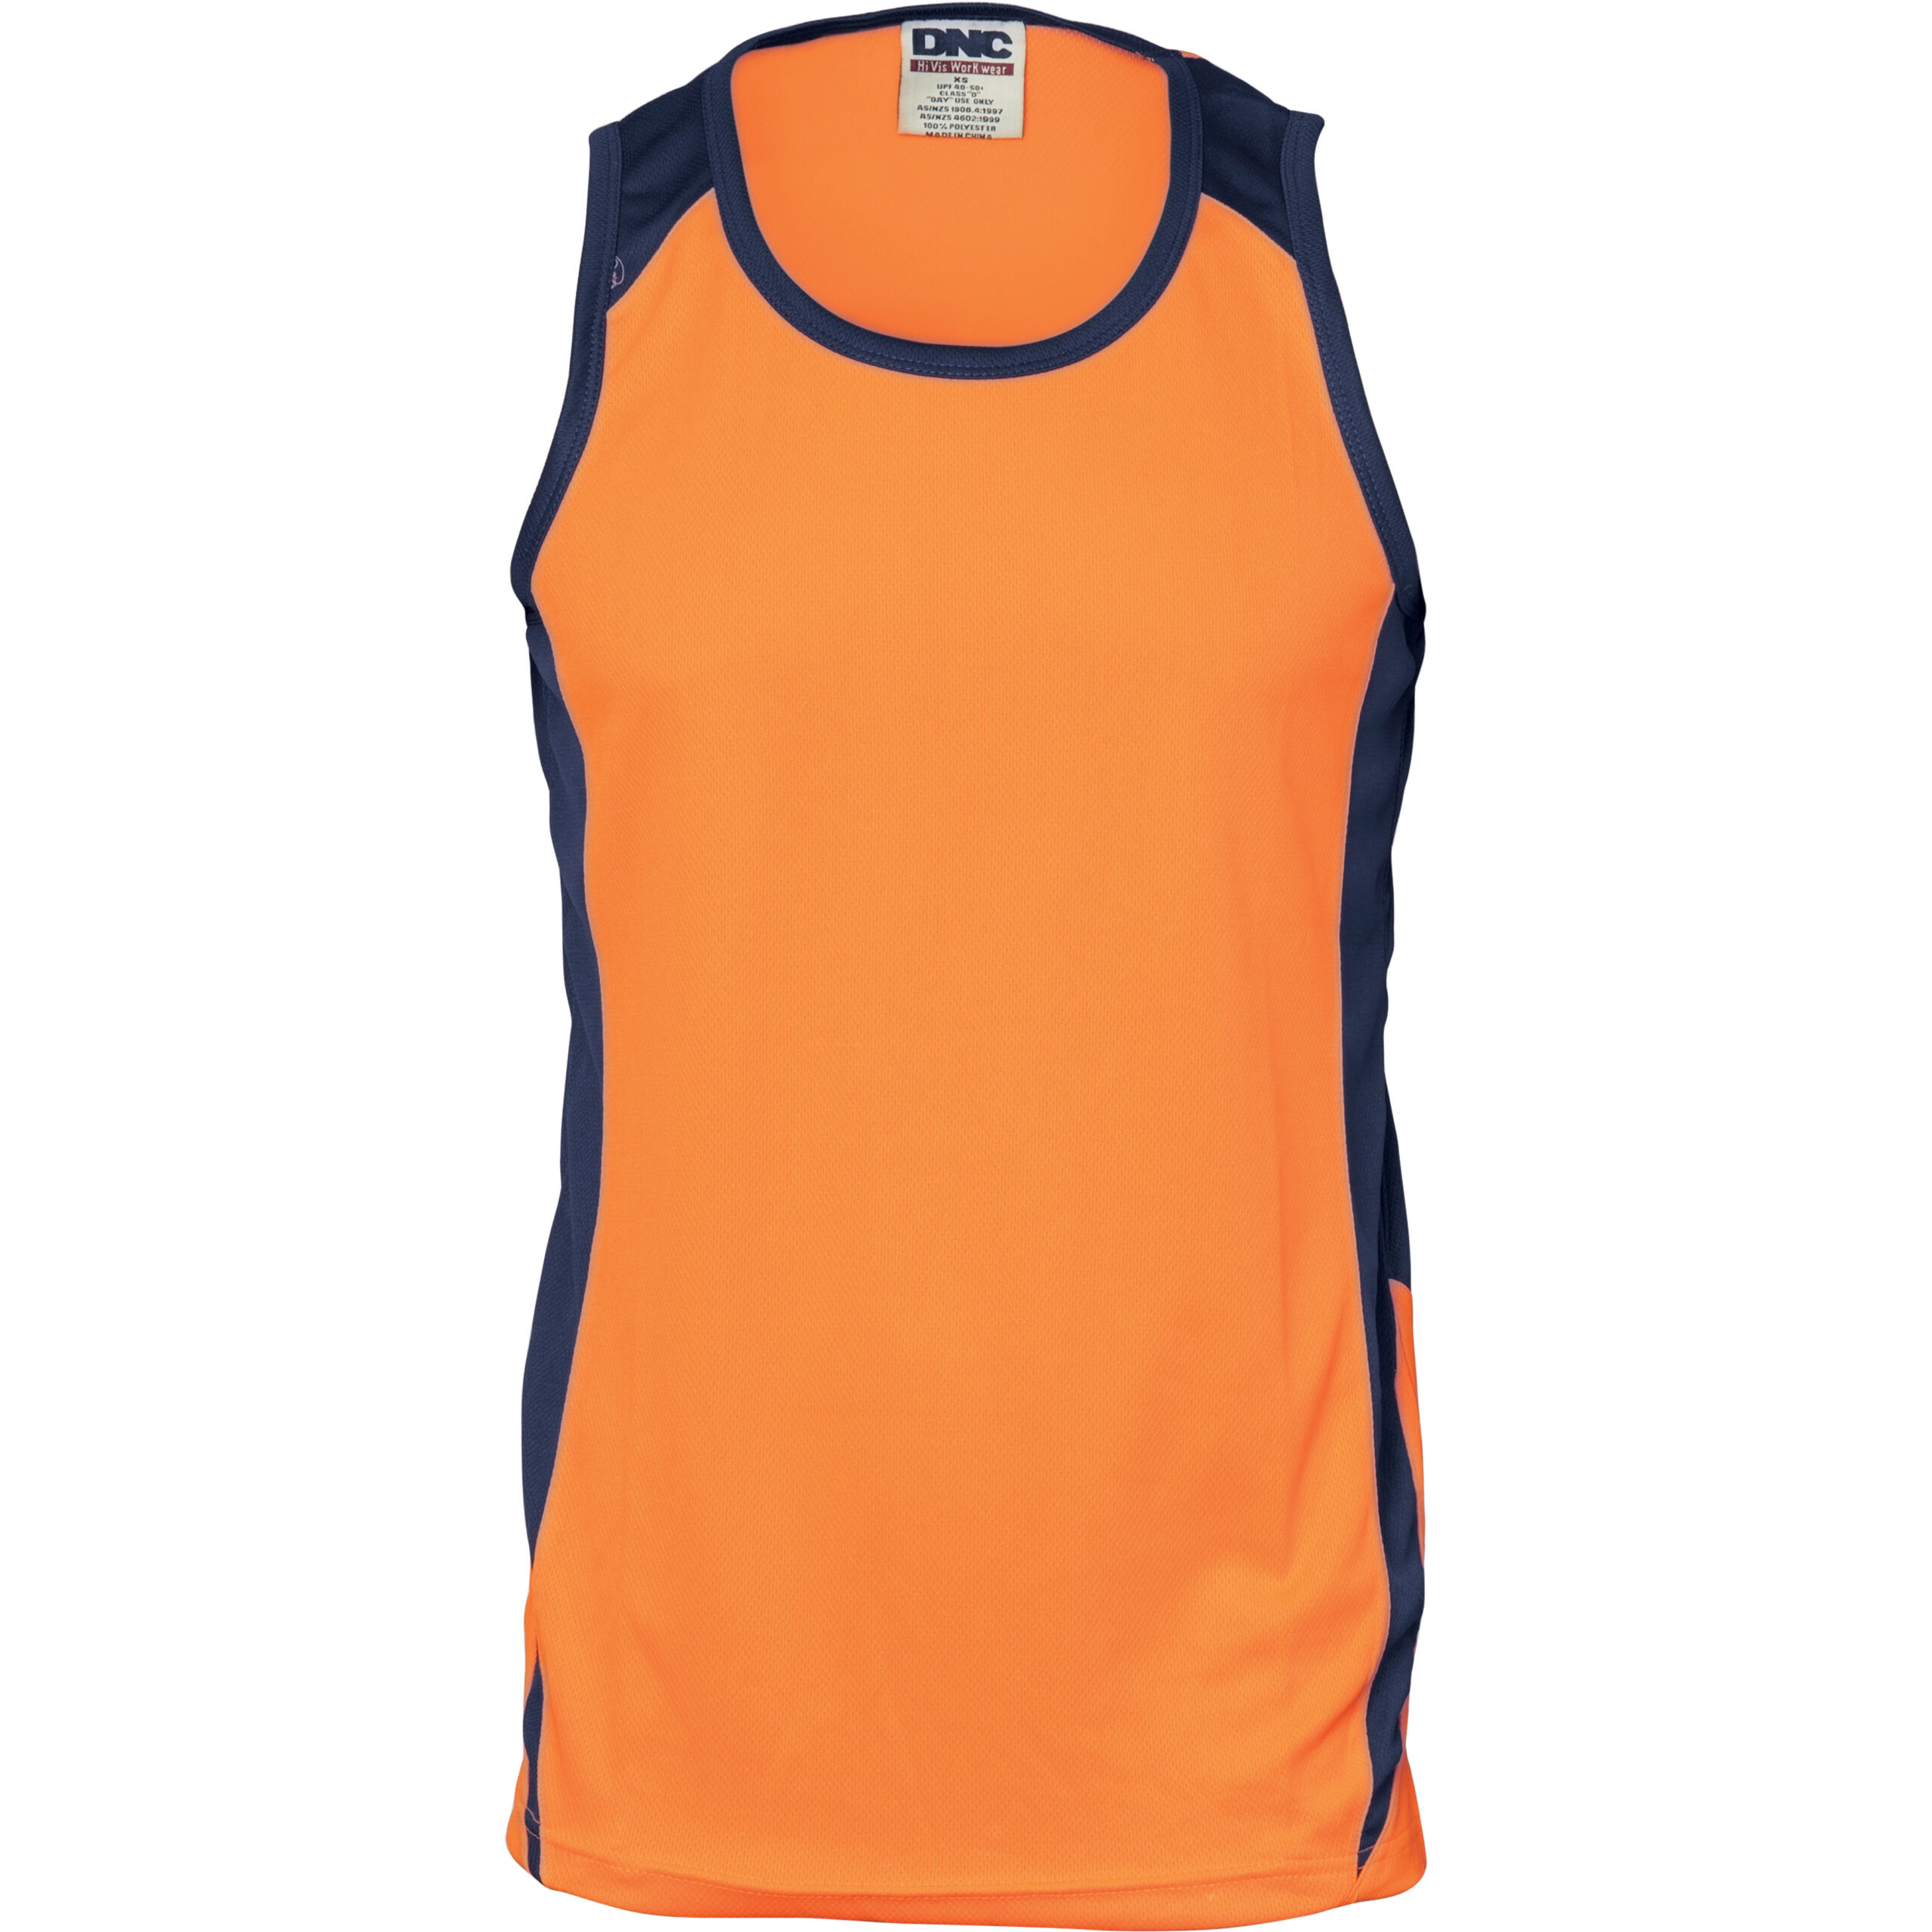 HIVIS Cool Breathe Action Singlet 3842 - Workwearlink & Embroidery